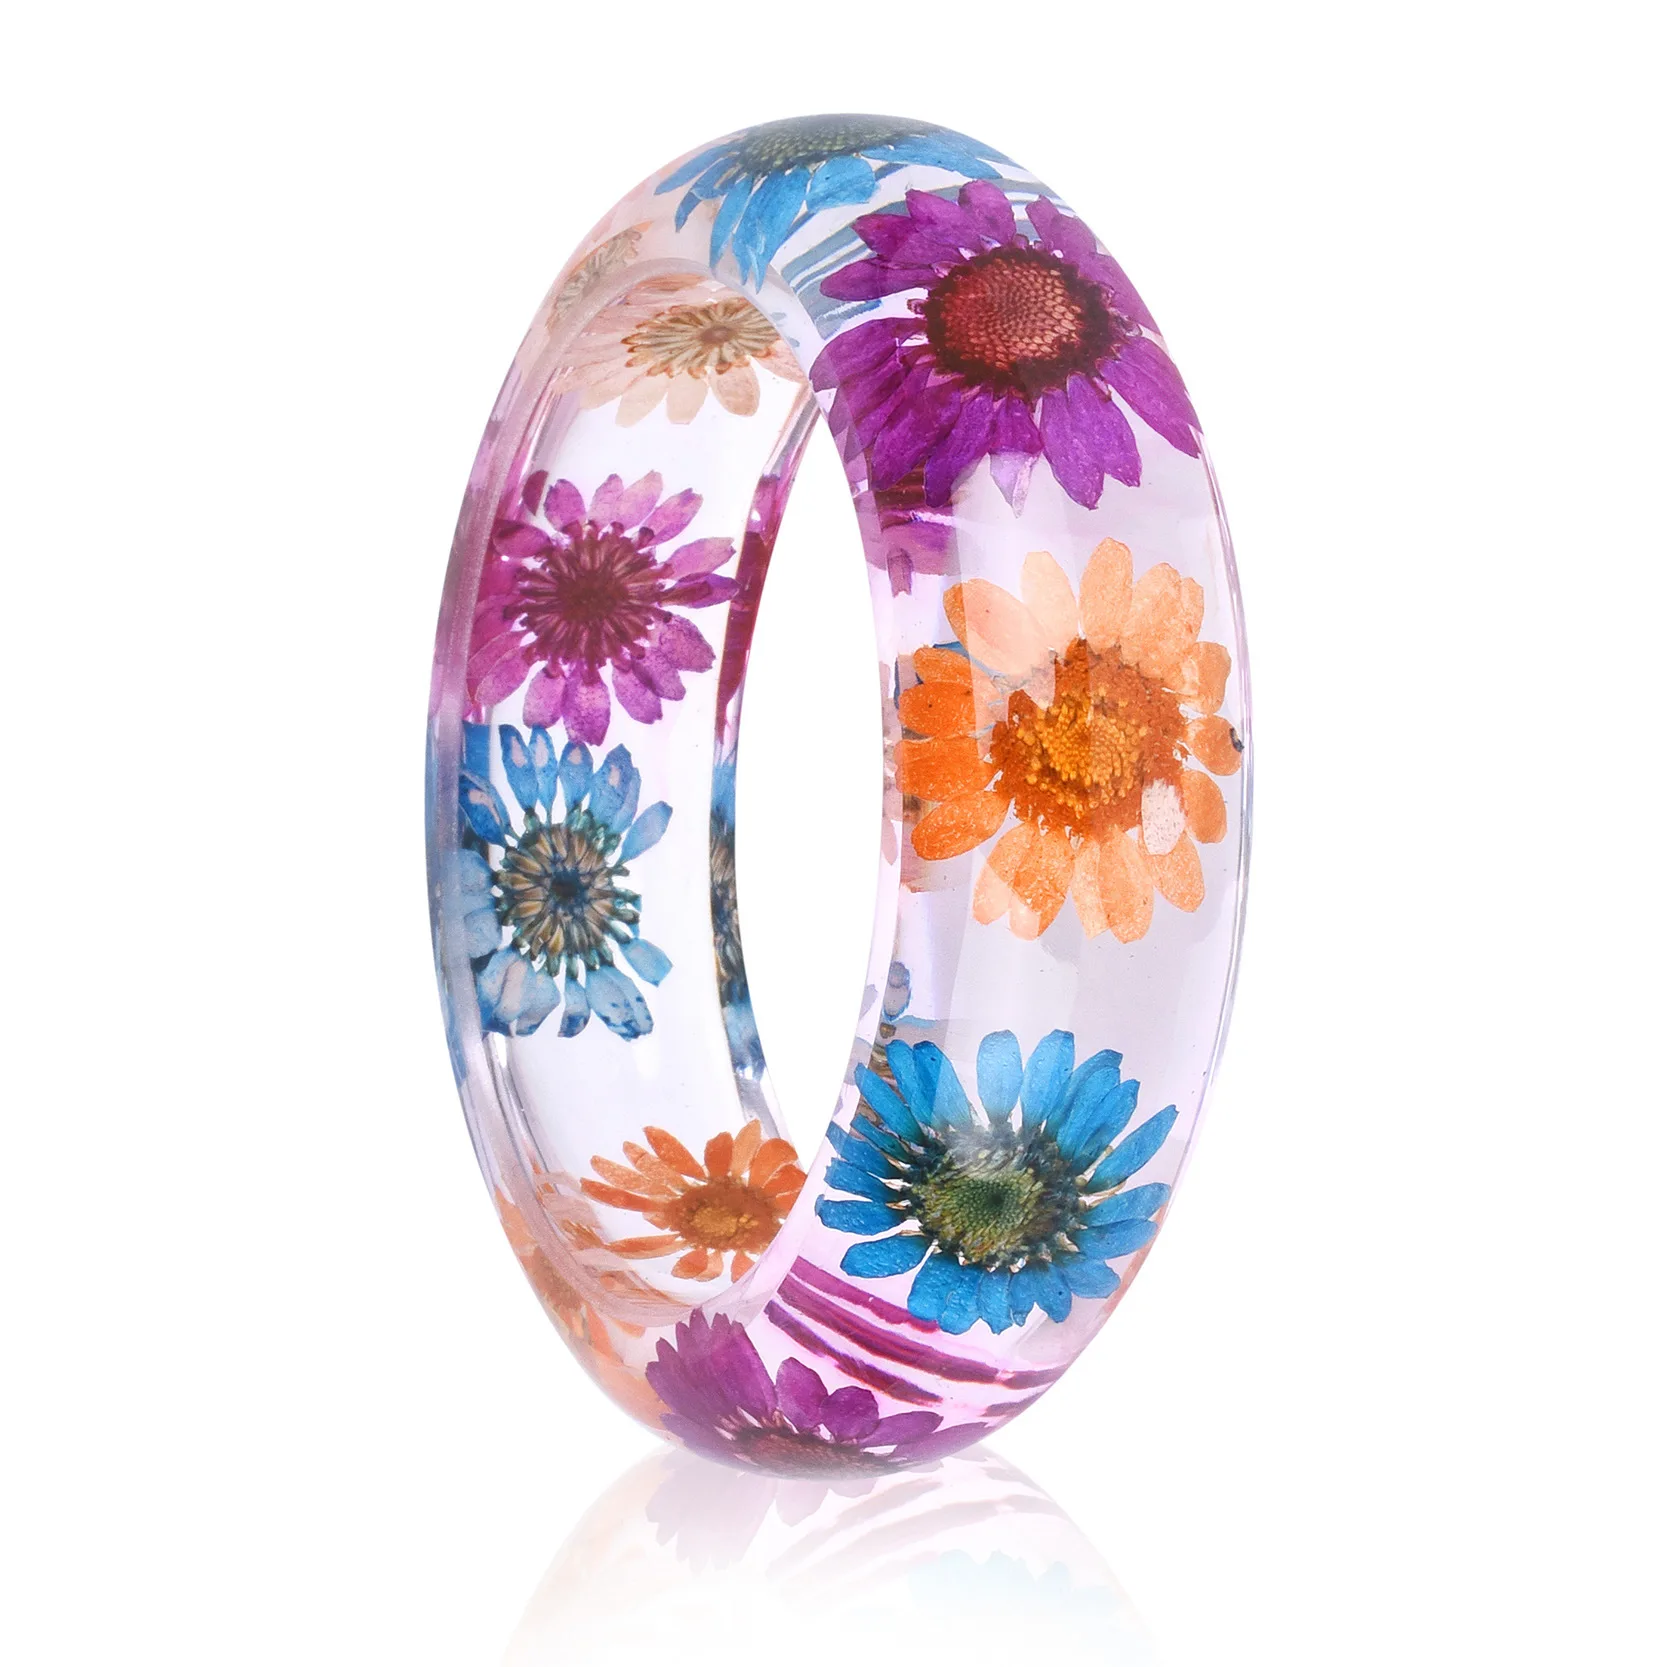 

2021Unique Female Handmade Plant Jewelry Crystal Resin Jewelry Natural Flower Real Pressed Dried Flower Bracelet Bangle, Picture